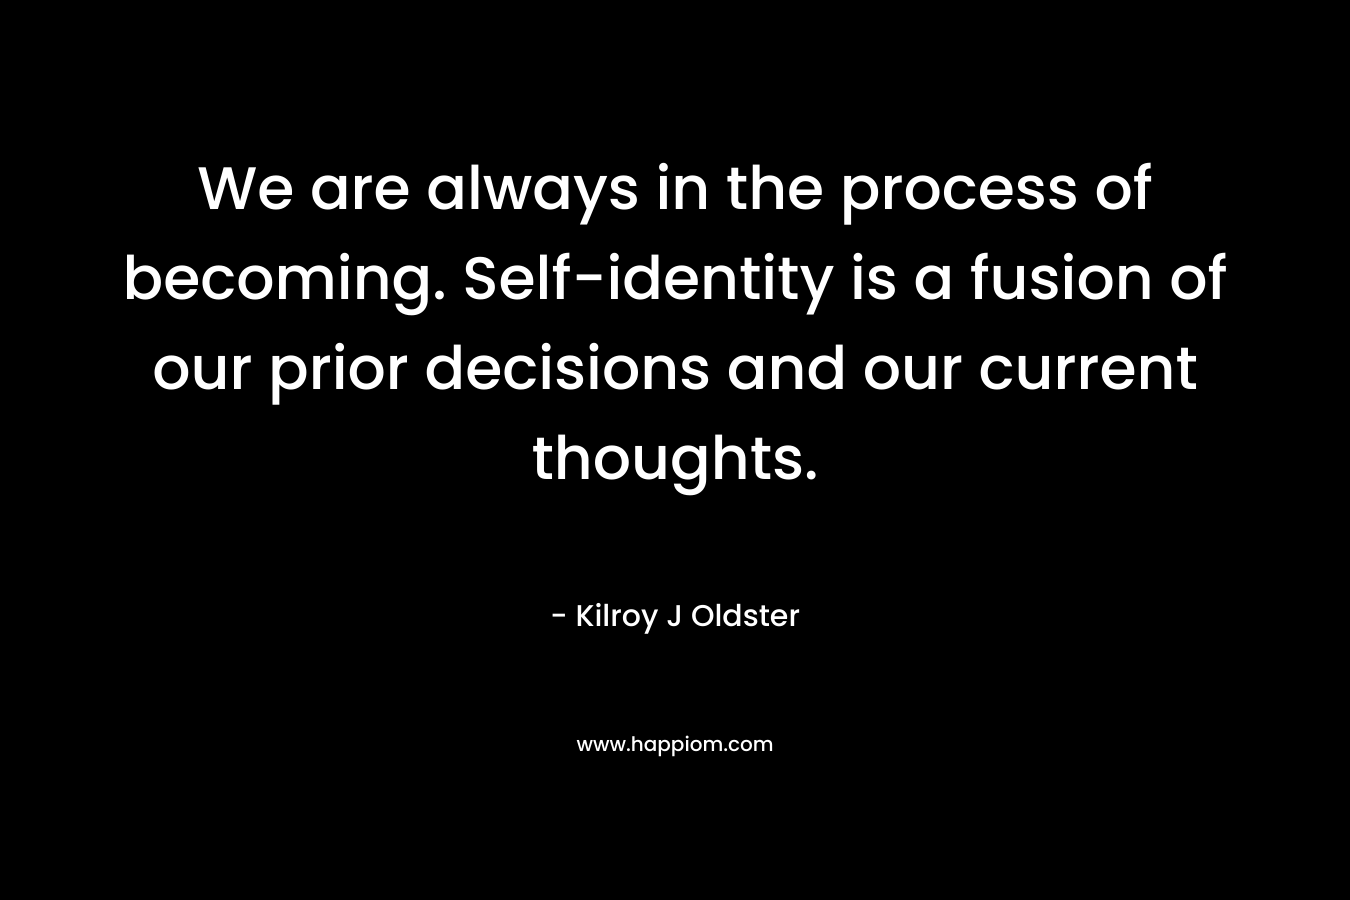 We are always in the process of becoming. Self-identity is a fusion of our prior decisions and our current thoughts.